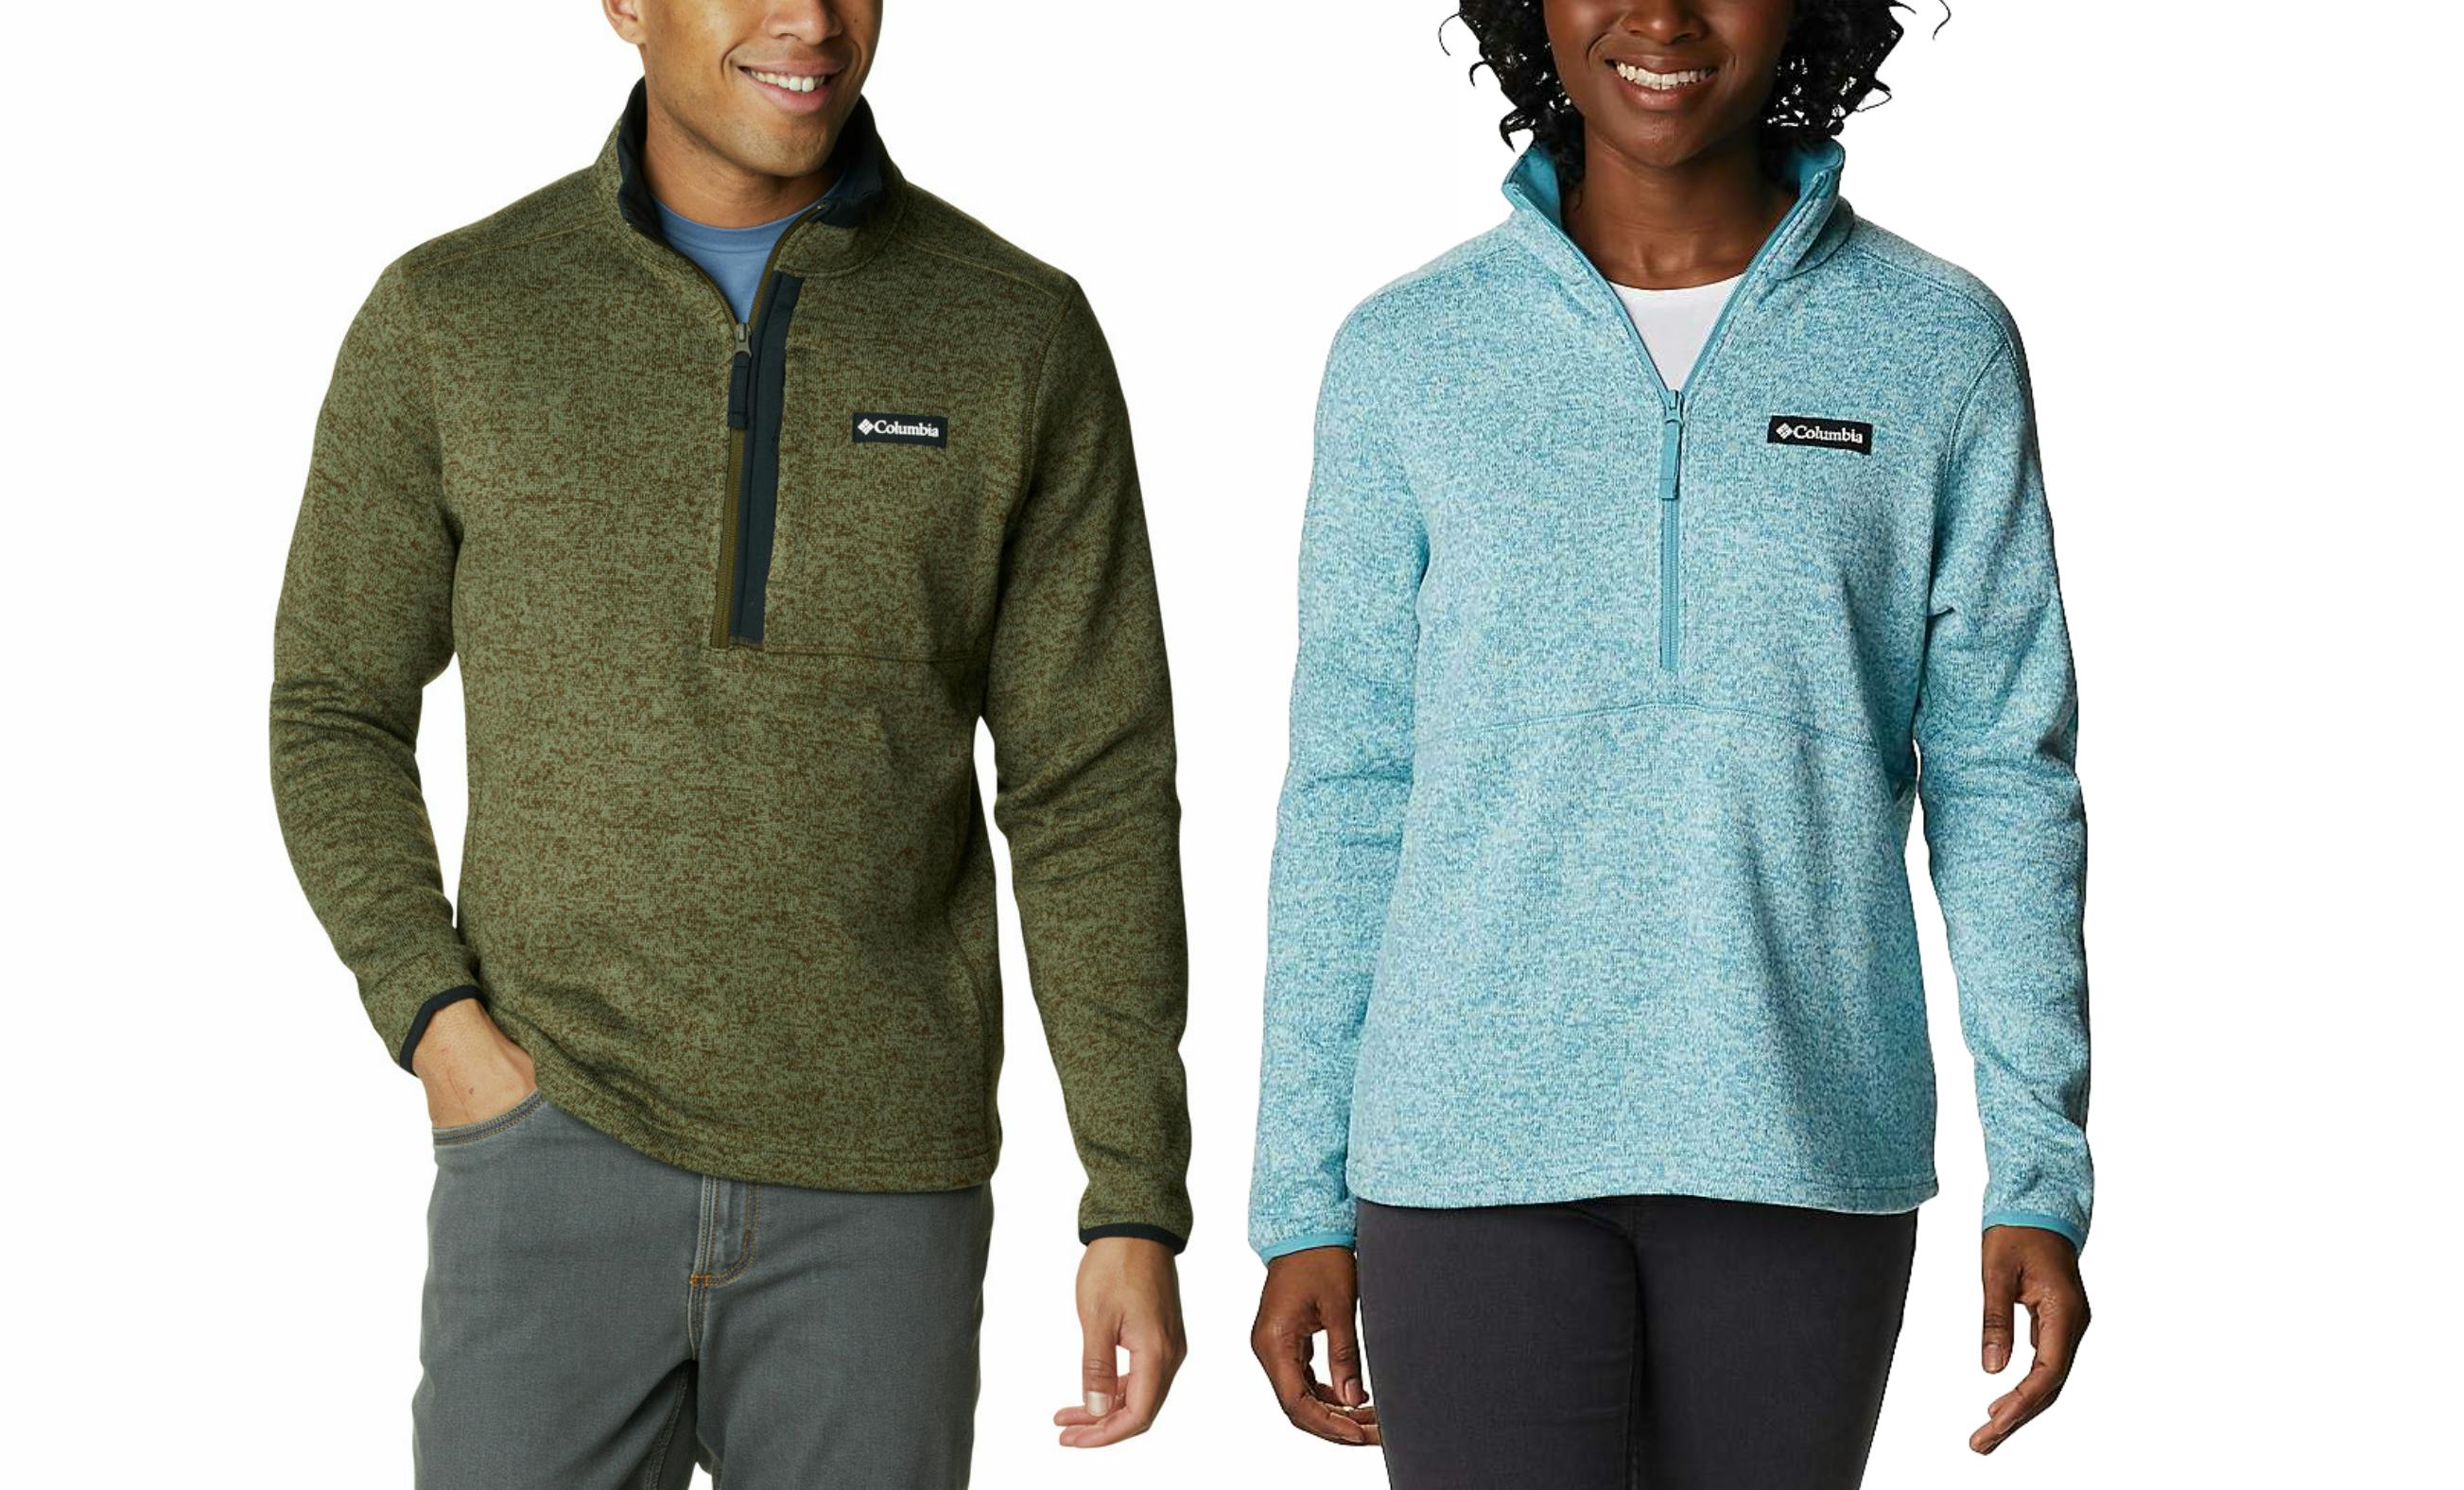 Product pictures of the men's and women's versions of the Columbia Sweater Weather Half-Zip. 